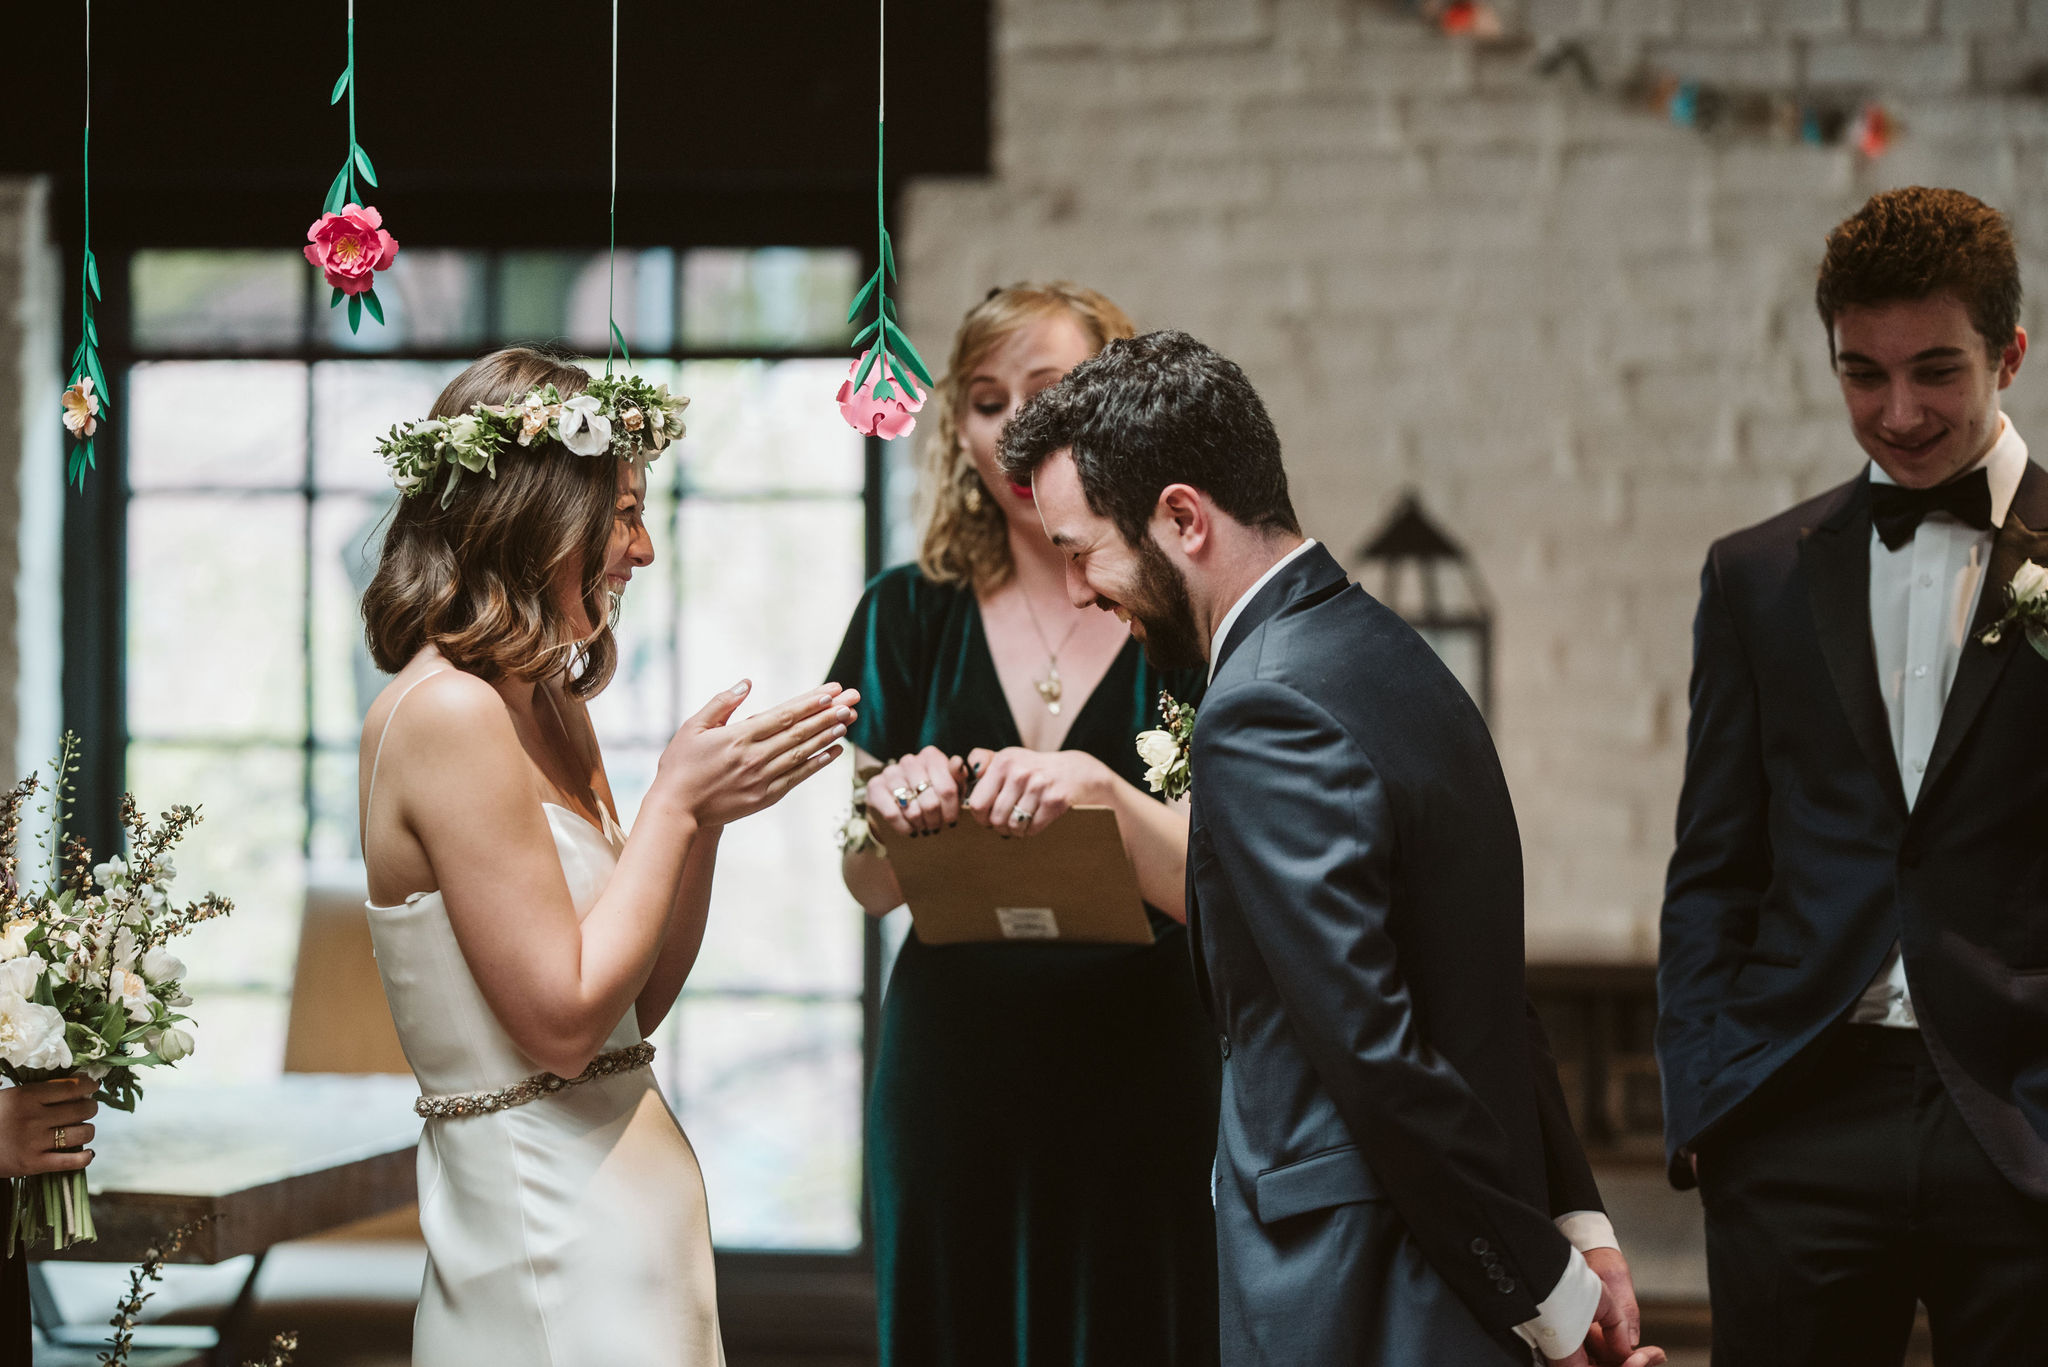  Washington DC, Baltimore Wedding Photographer, Alexandria, Old Town, Jewel Tone, Romantic, Modern, Virtue Feed &amp; Grain, Paper Flowers, Bride and Groom Laugh Together During Ceremony 